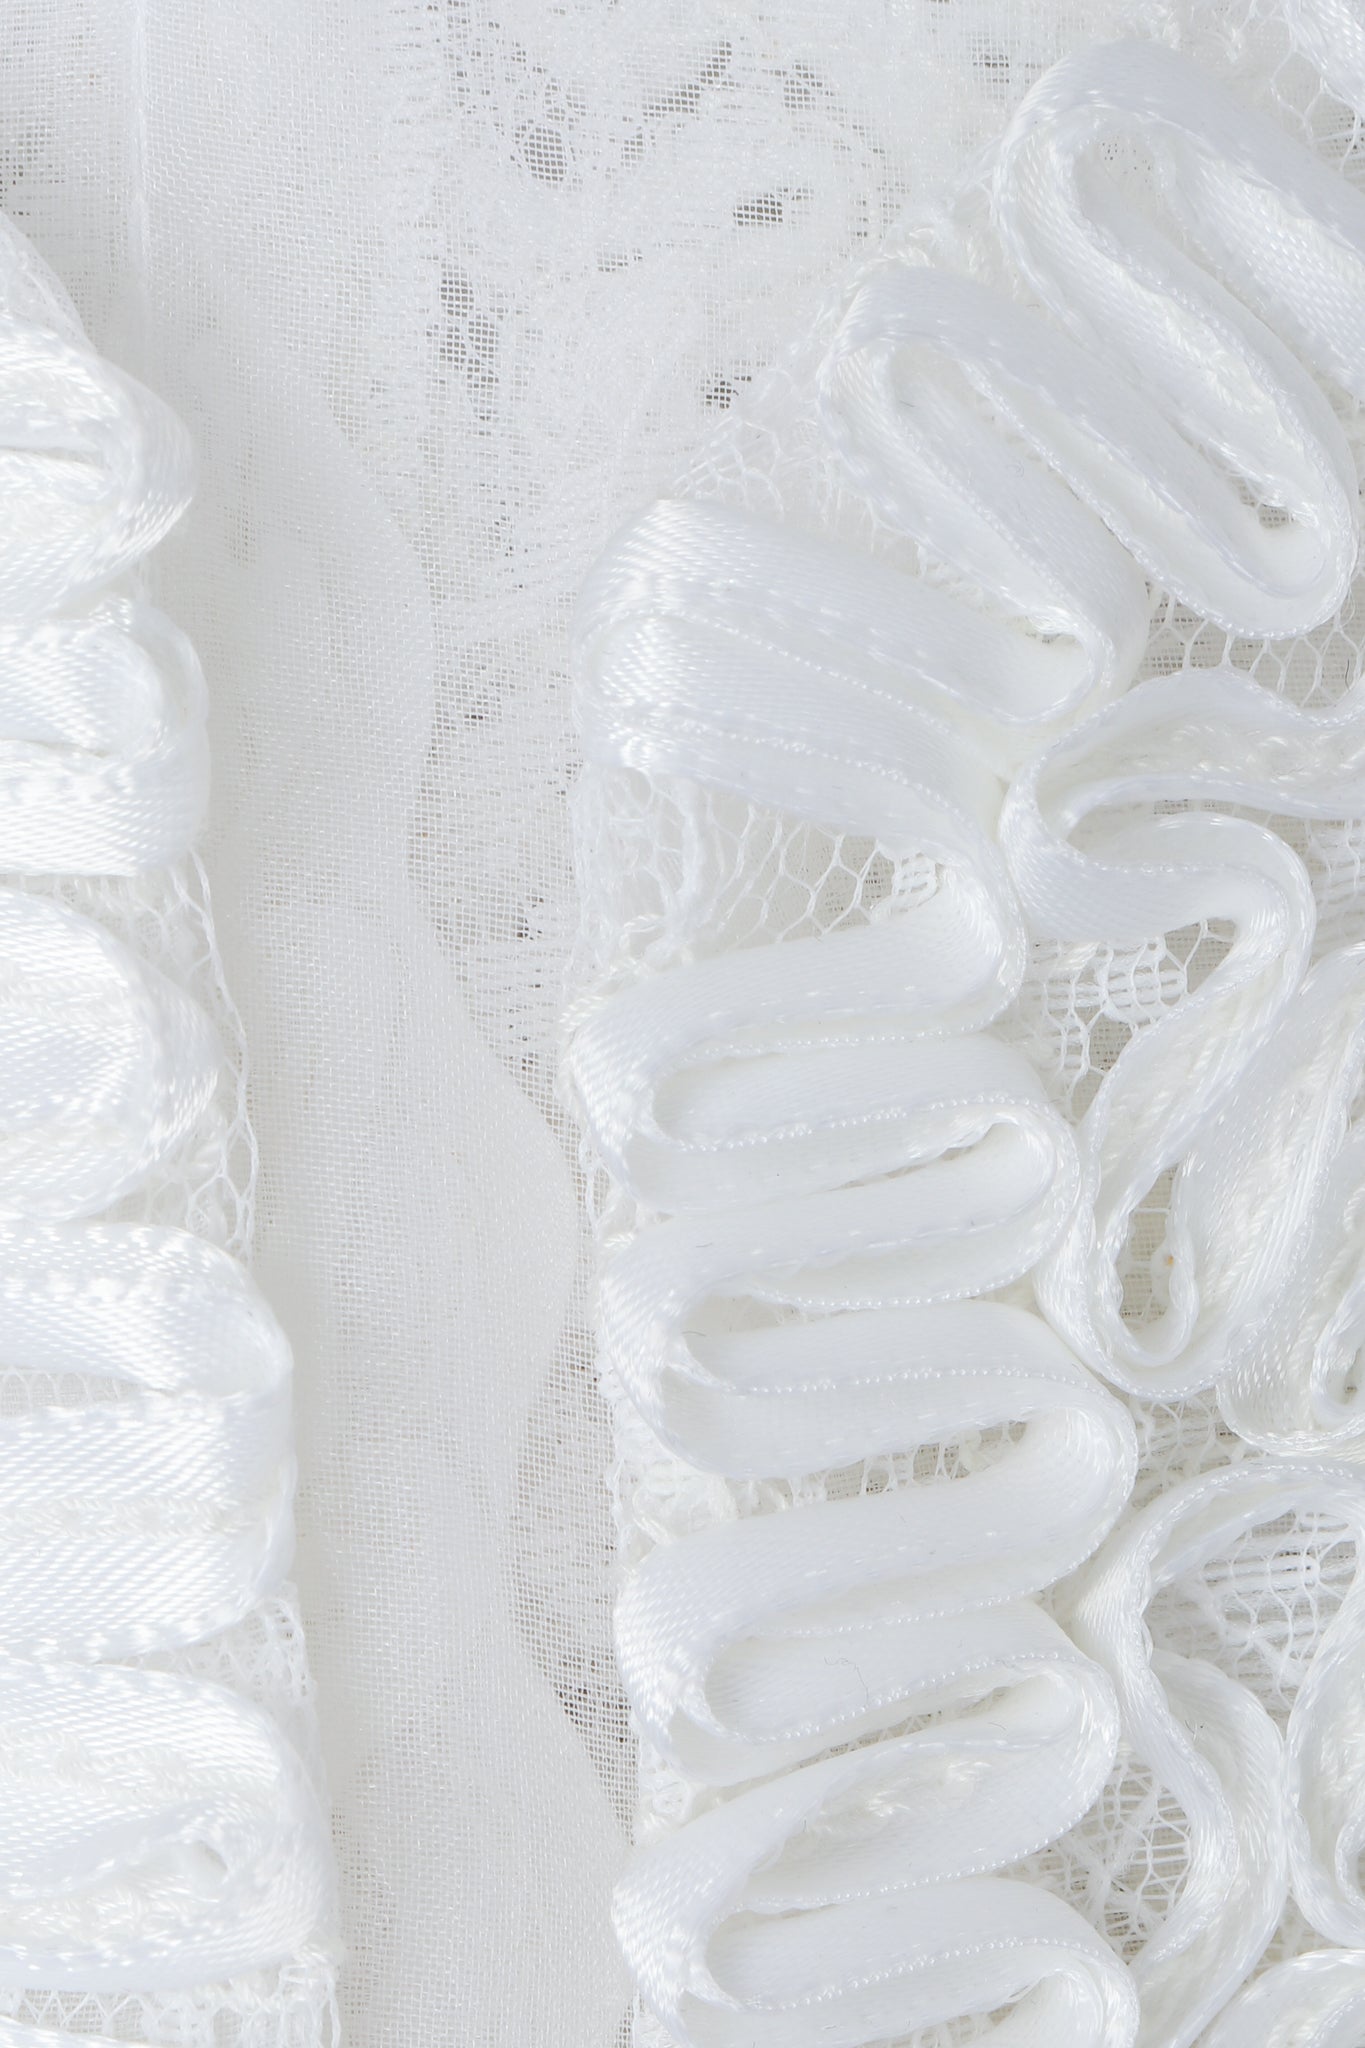 Victor Costa White Ribbon Lace Fabric Detail